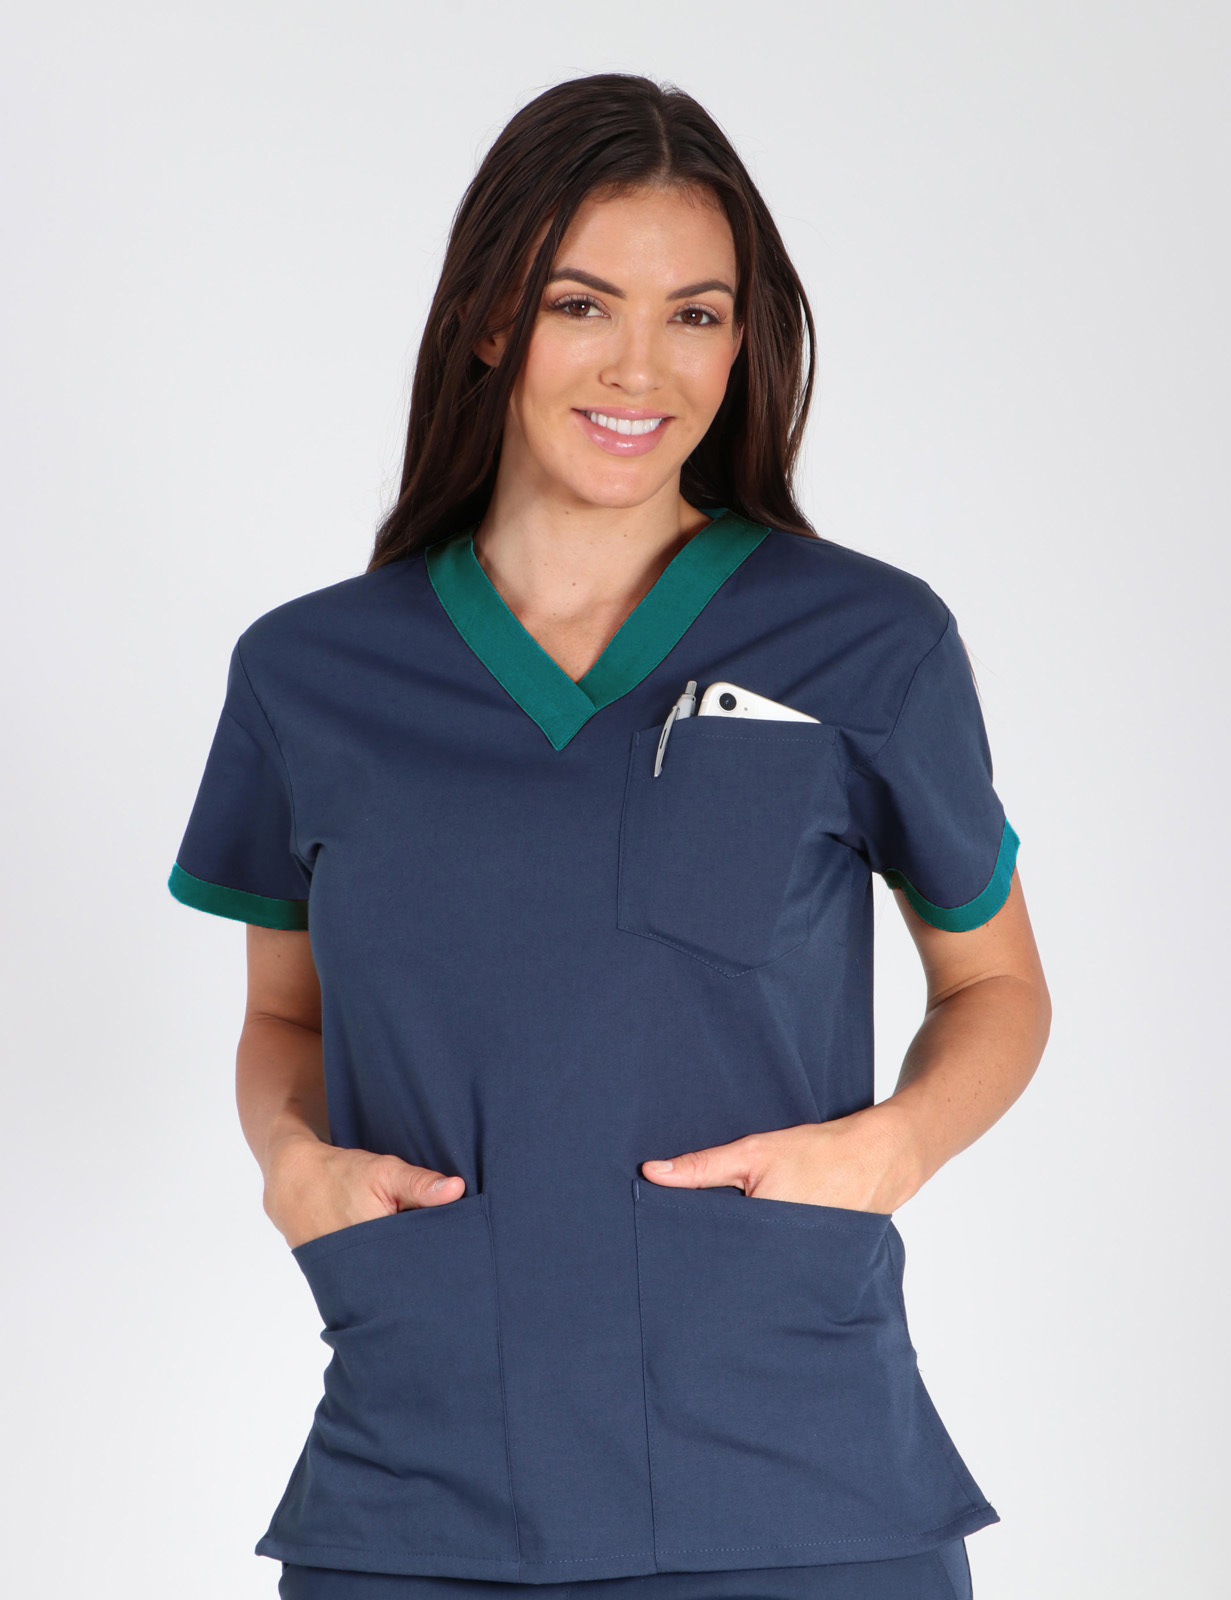 Perth Hospital - Radiology Department (Contrast V-neck in Navy with Caribbean Trim incl Logos)